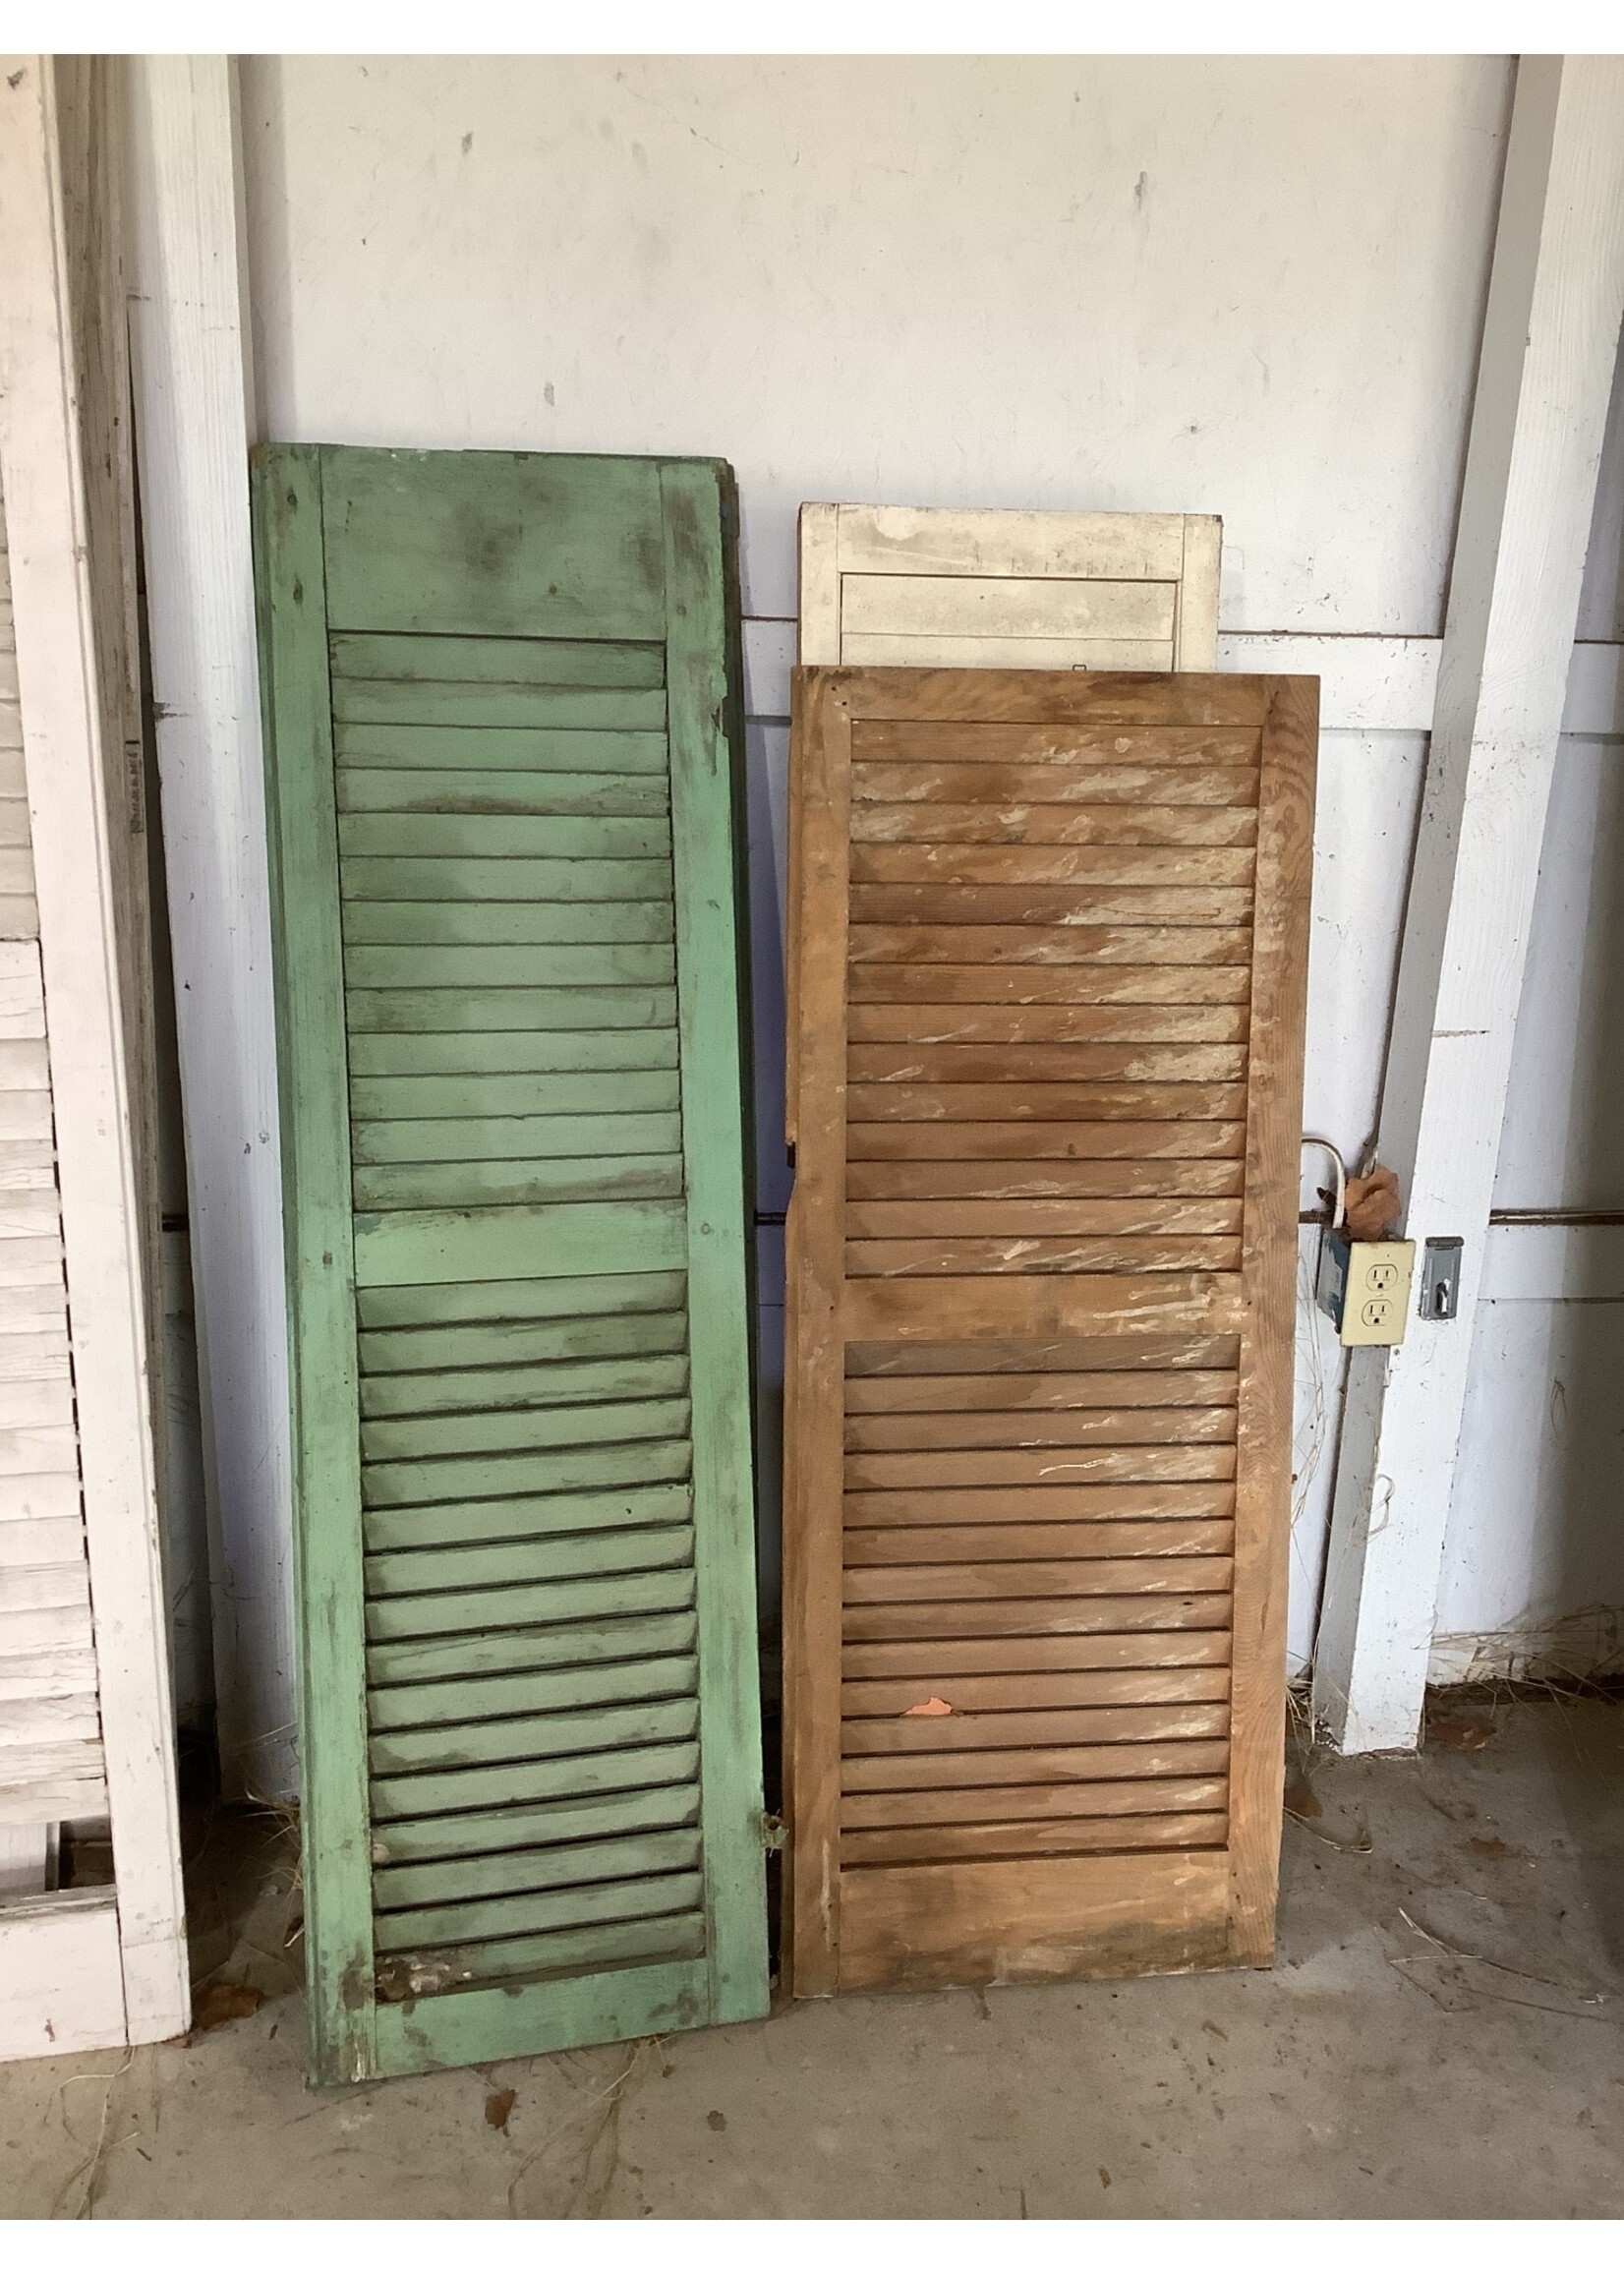 Architectural Salvage Shutters Small 55x16x1.5